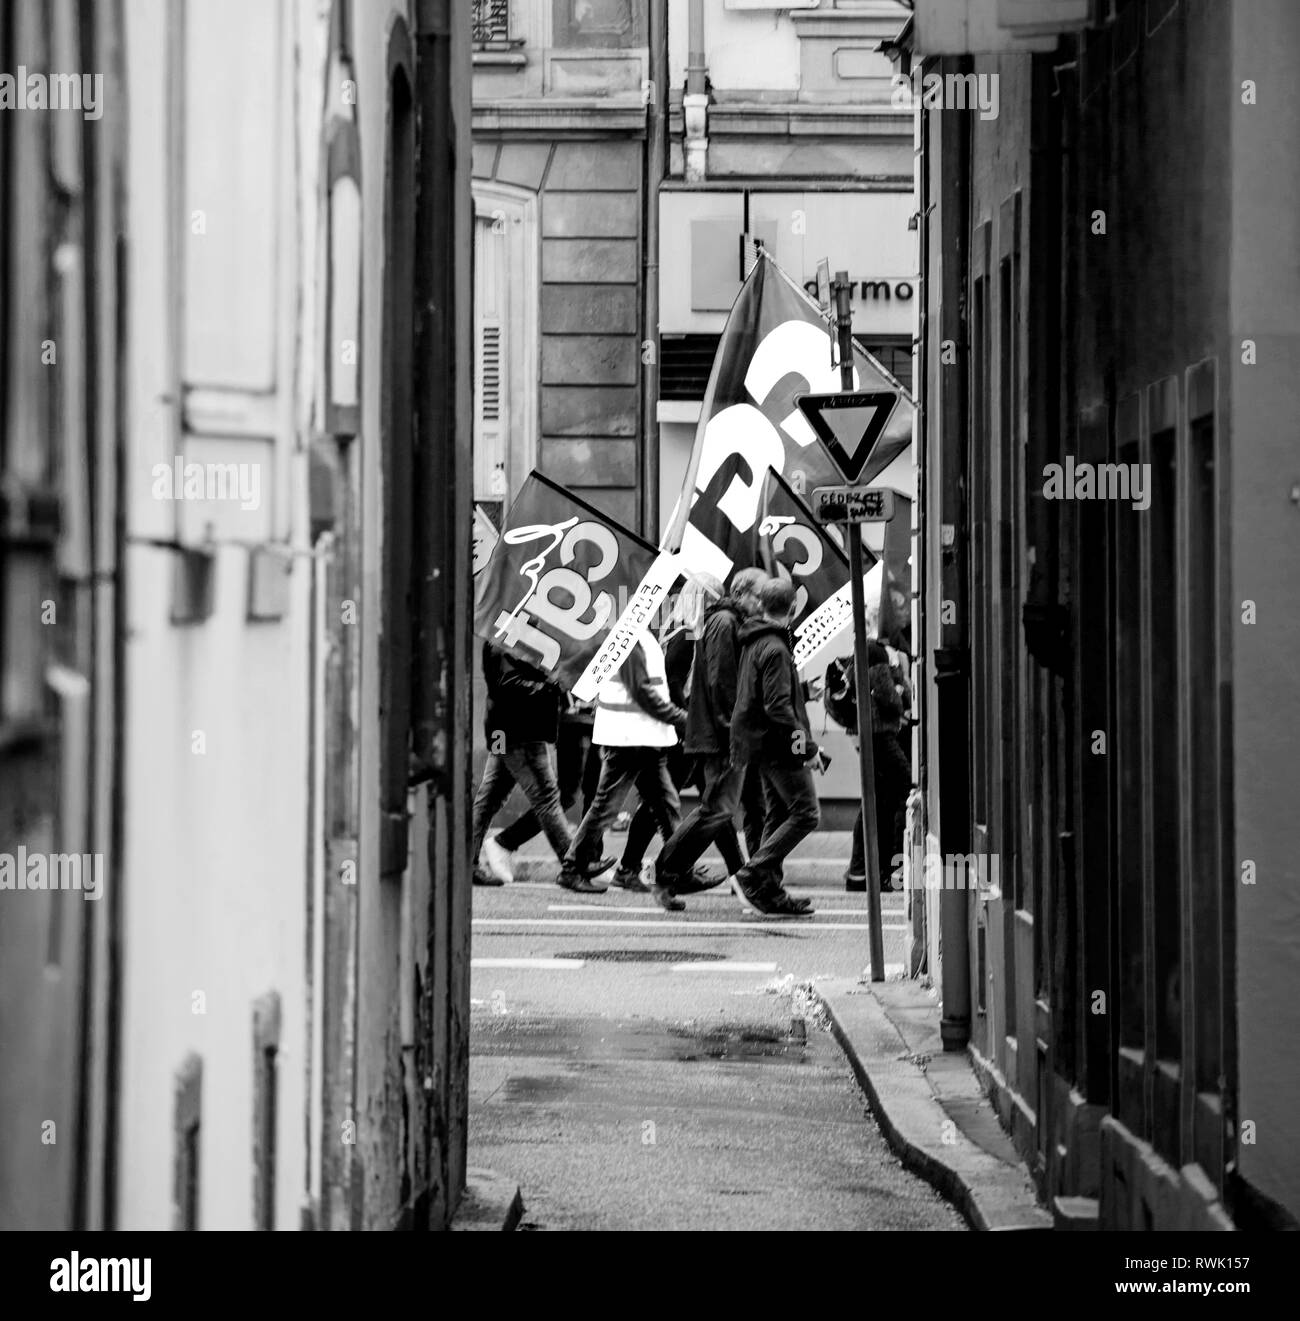 Strasbourg, France - Sep 12, 2017: View through tiny street at crowd with flags - political march during a French Nationwide day of protest against the labor reform proposed by President Macron - black and white Stock Photo